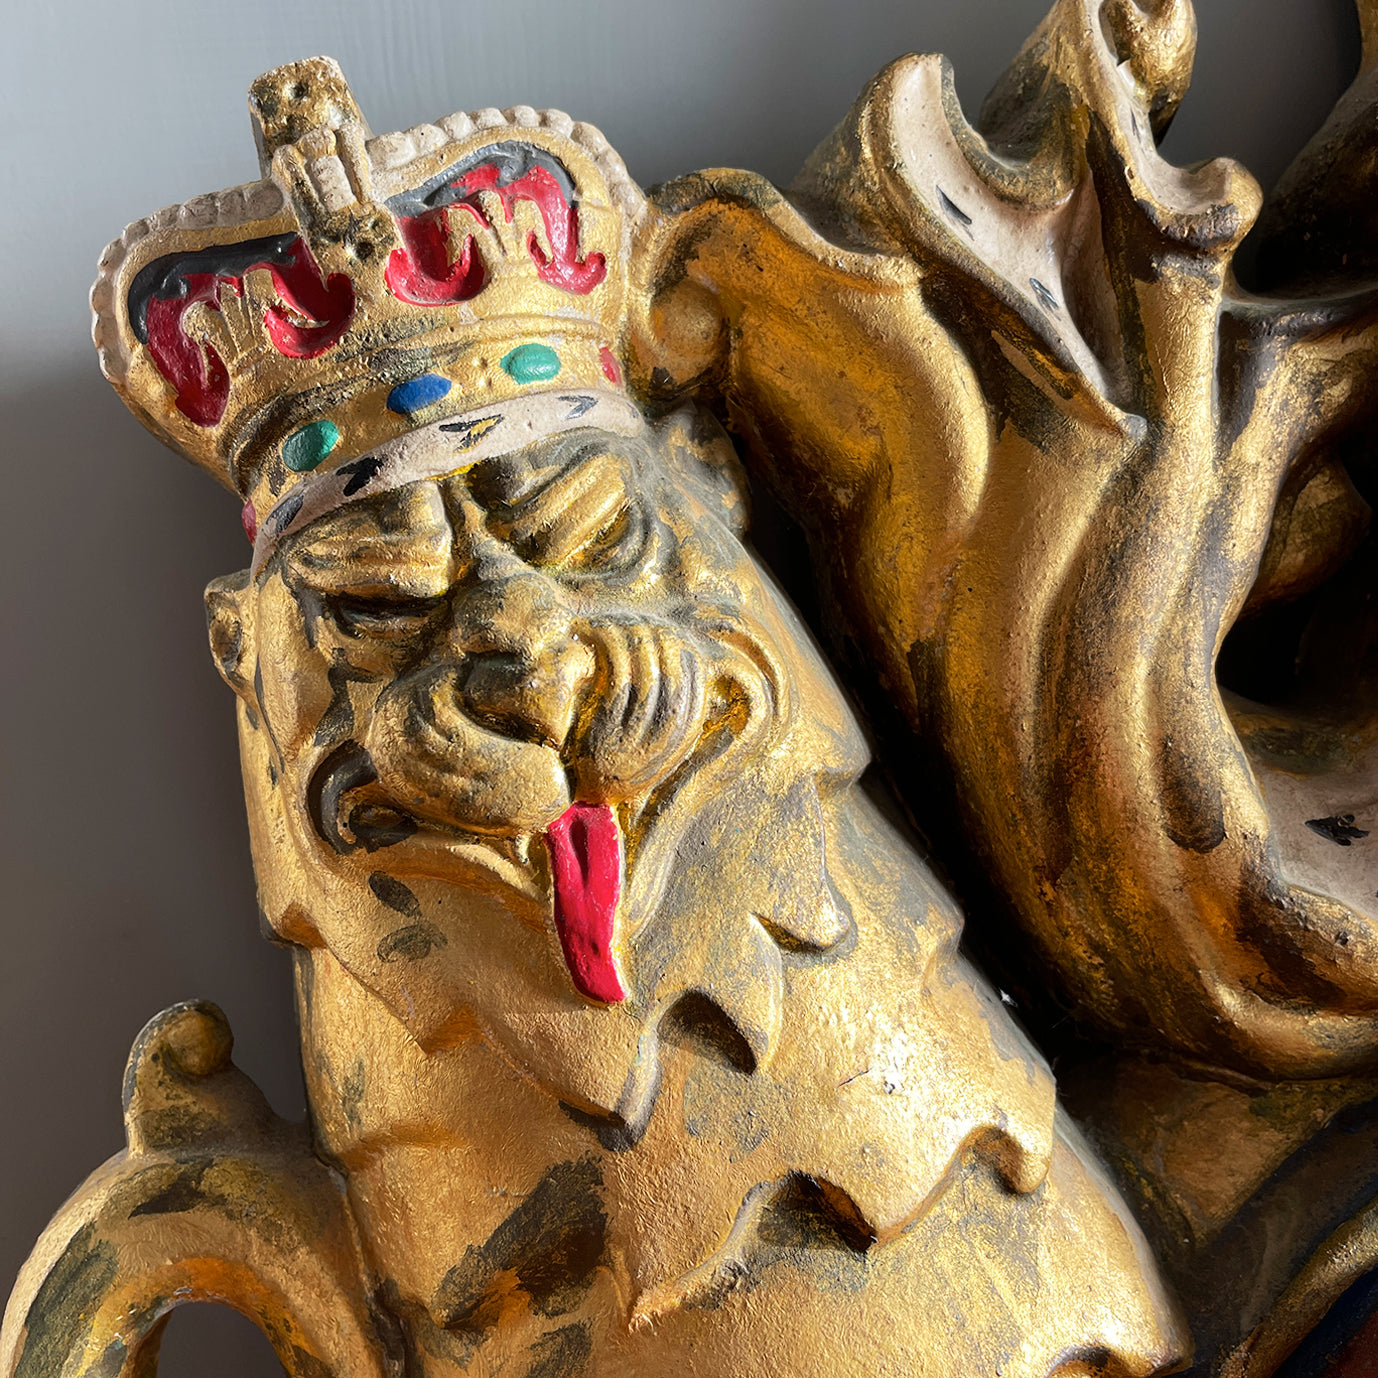 A magnificent, large cast Royal Coat of Arms centred by a crown with lion surmounted and flanked by the lion and unicorn supporting the shield. With foliate surrounded ribbon raised and carrying the motto of the monarch of the United Kingdom, 'Dieu et mon droit' meaning 'God and my right' - SHOP NOW - www.intovintage.co.uk